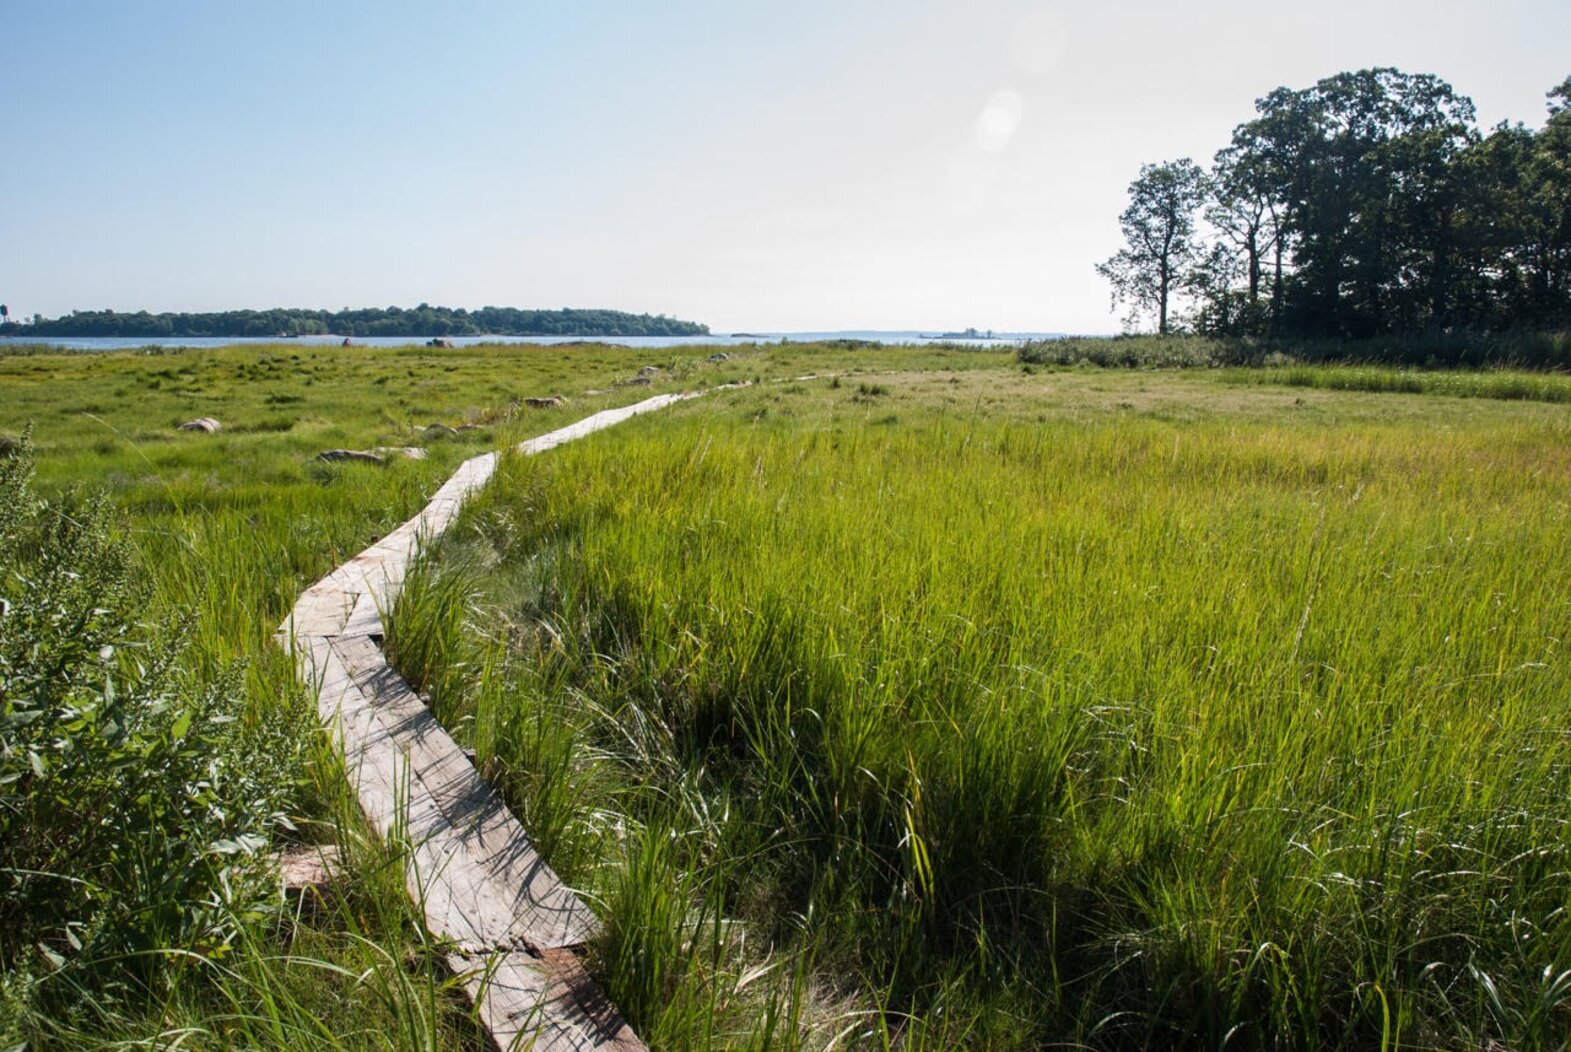 A view over the saltmarsh from Pelham Bay Park’s forested Hunter Island, one of the best spots in New York City to see wintering owls. Photo: Jack Rothman